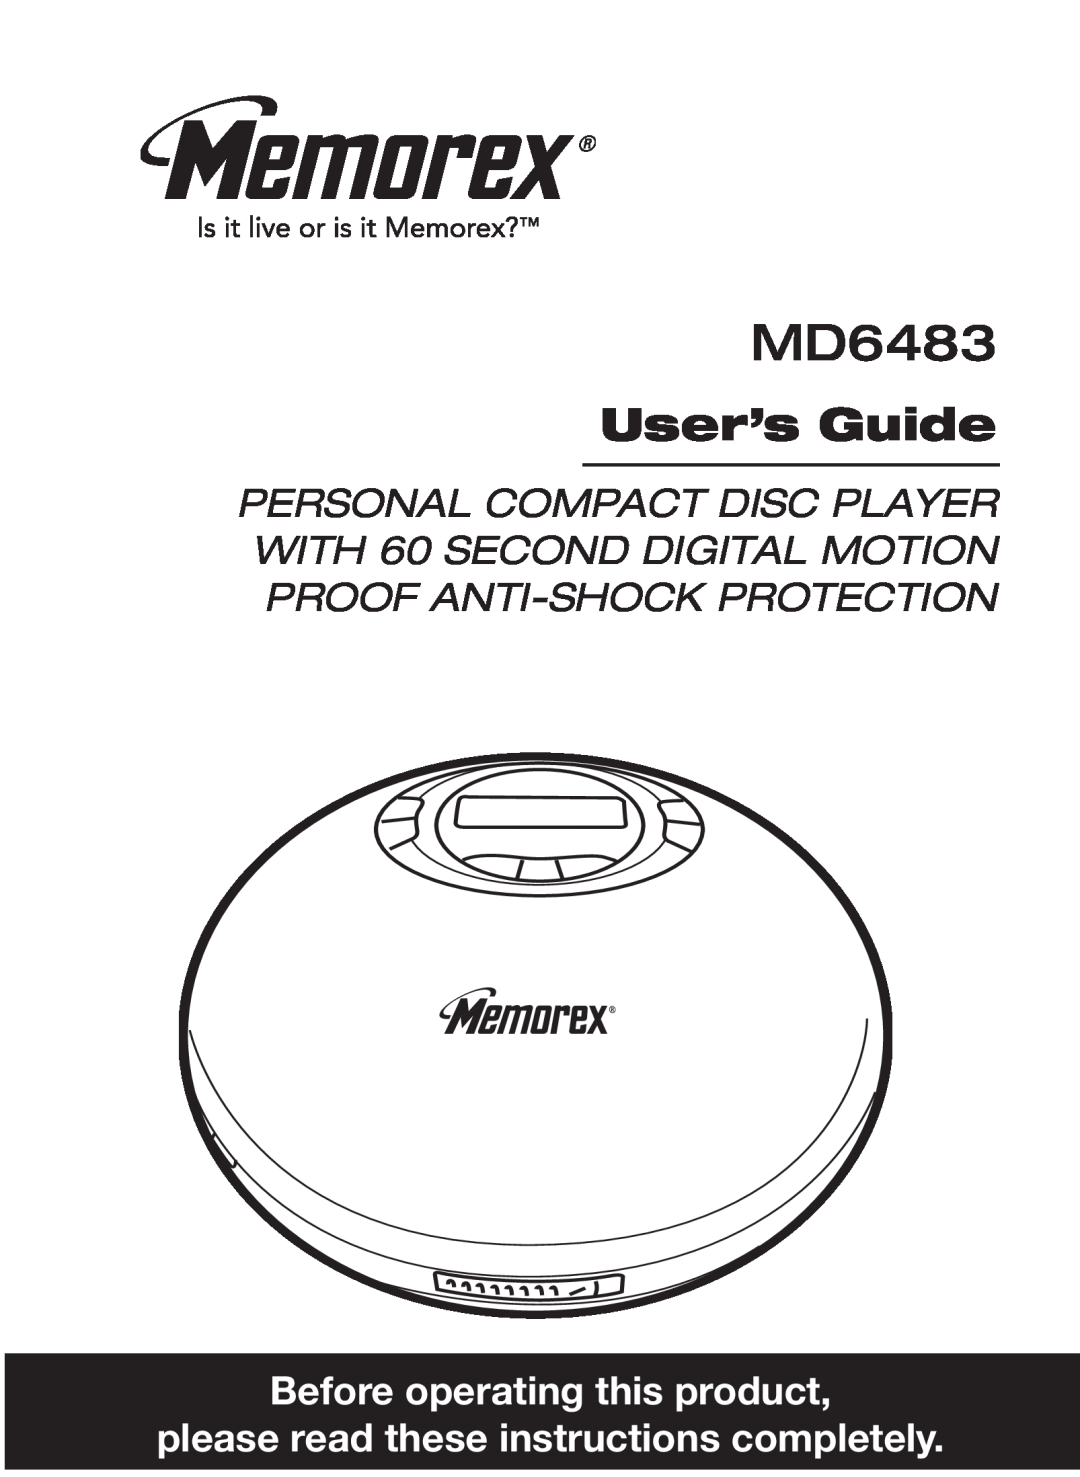 Memorex MD6483 manual User’s Guide, Before operating this product, please read these instructions completely 